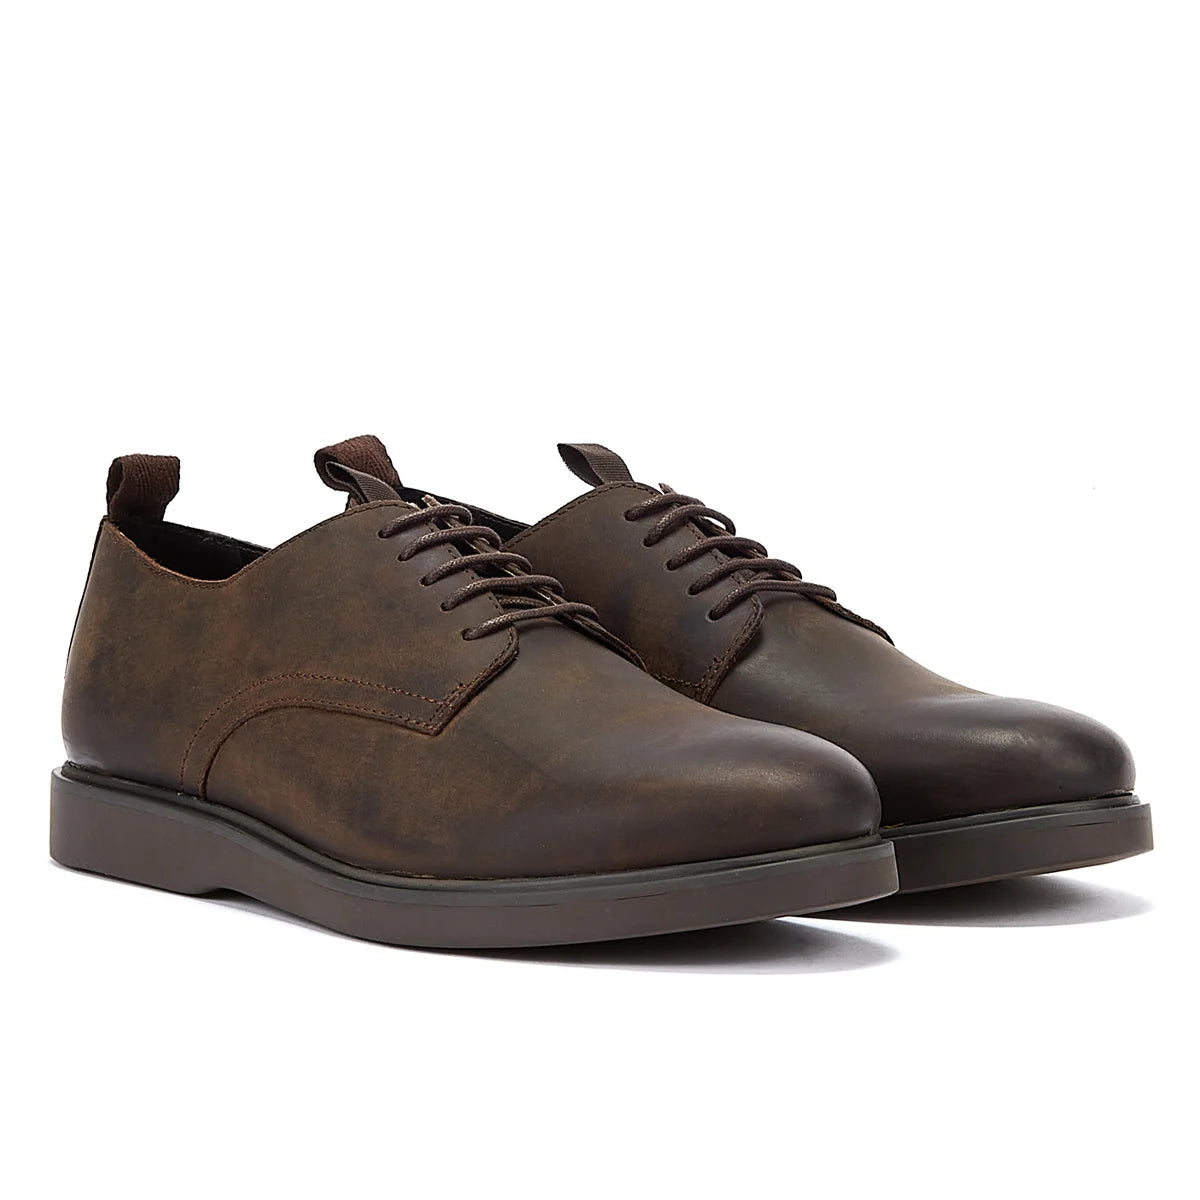 Hudson Barnstable Crazy Leather Men’s Brown Lace-Up Shoes